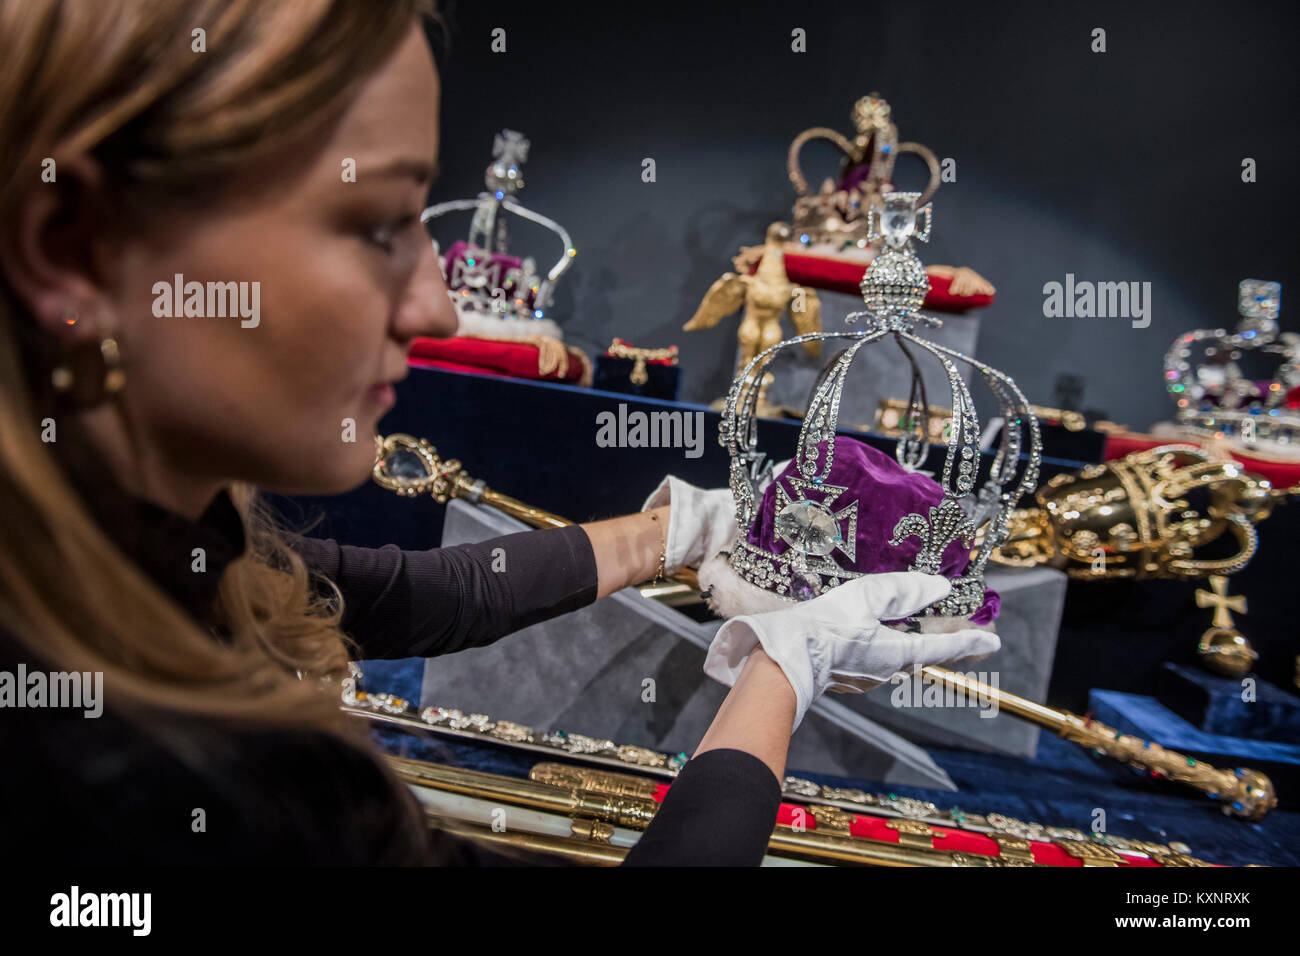 London, UK. 11th January, 2018. Replicas of the British Crown Jewels were made in honour of the Coronation of Queen Elizabeth II on 2nd June 1953 in order to be displayed to communities across the Commonwealth.Sotheby's London “Of Royal and Noble Descent” sale includes over 250 Royal And Aristocratic Heirlooms, including A Replica Set of the British Crown jewels. The ensemble of furniture, paintings, decorative arts and precious objects will be auctionedon 17 January 2018. Credit: Guy Bell/Alamy Live News Stock Photo